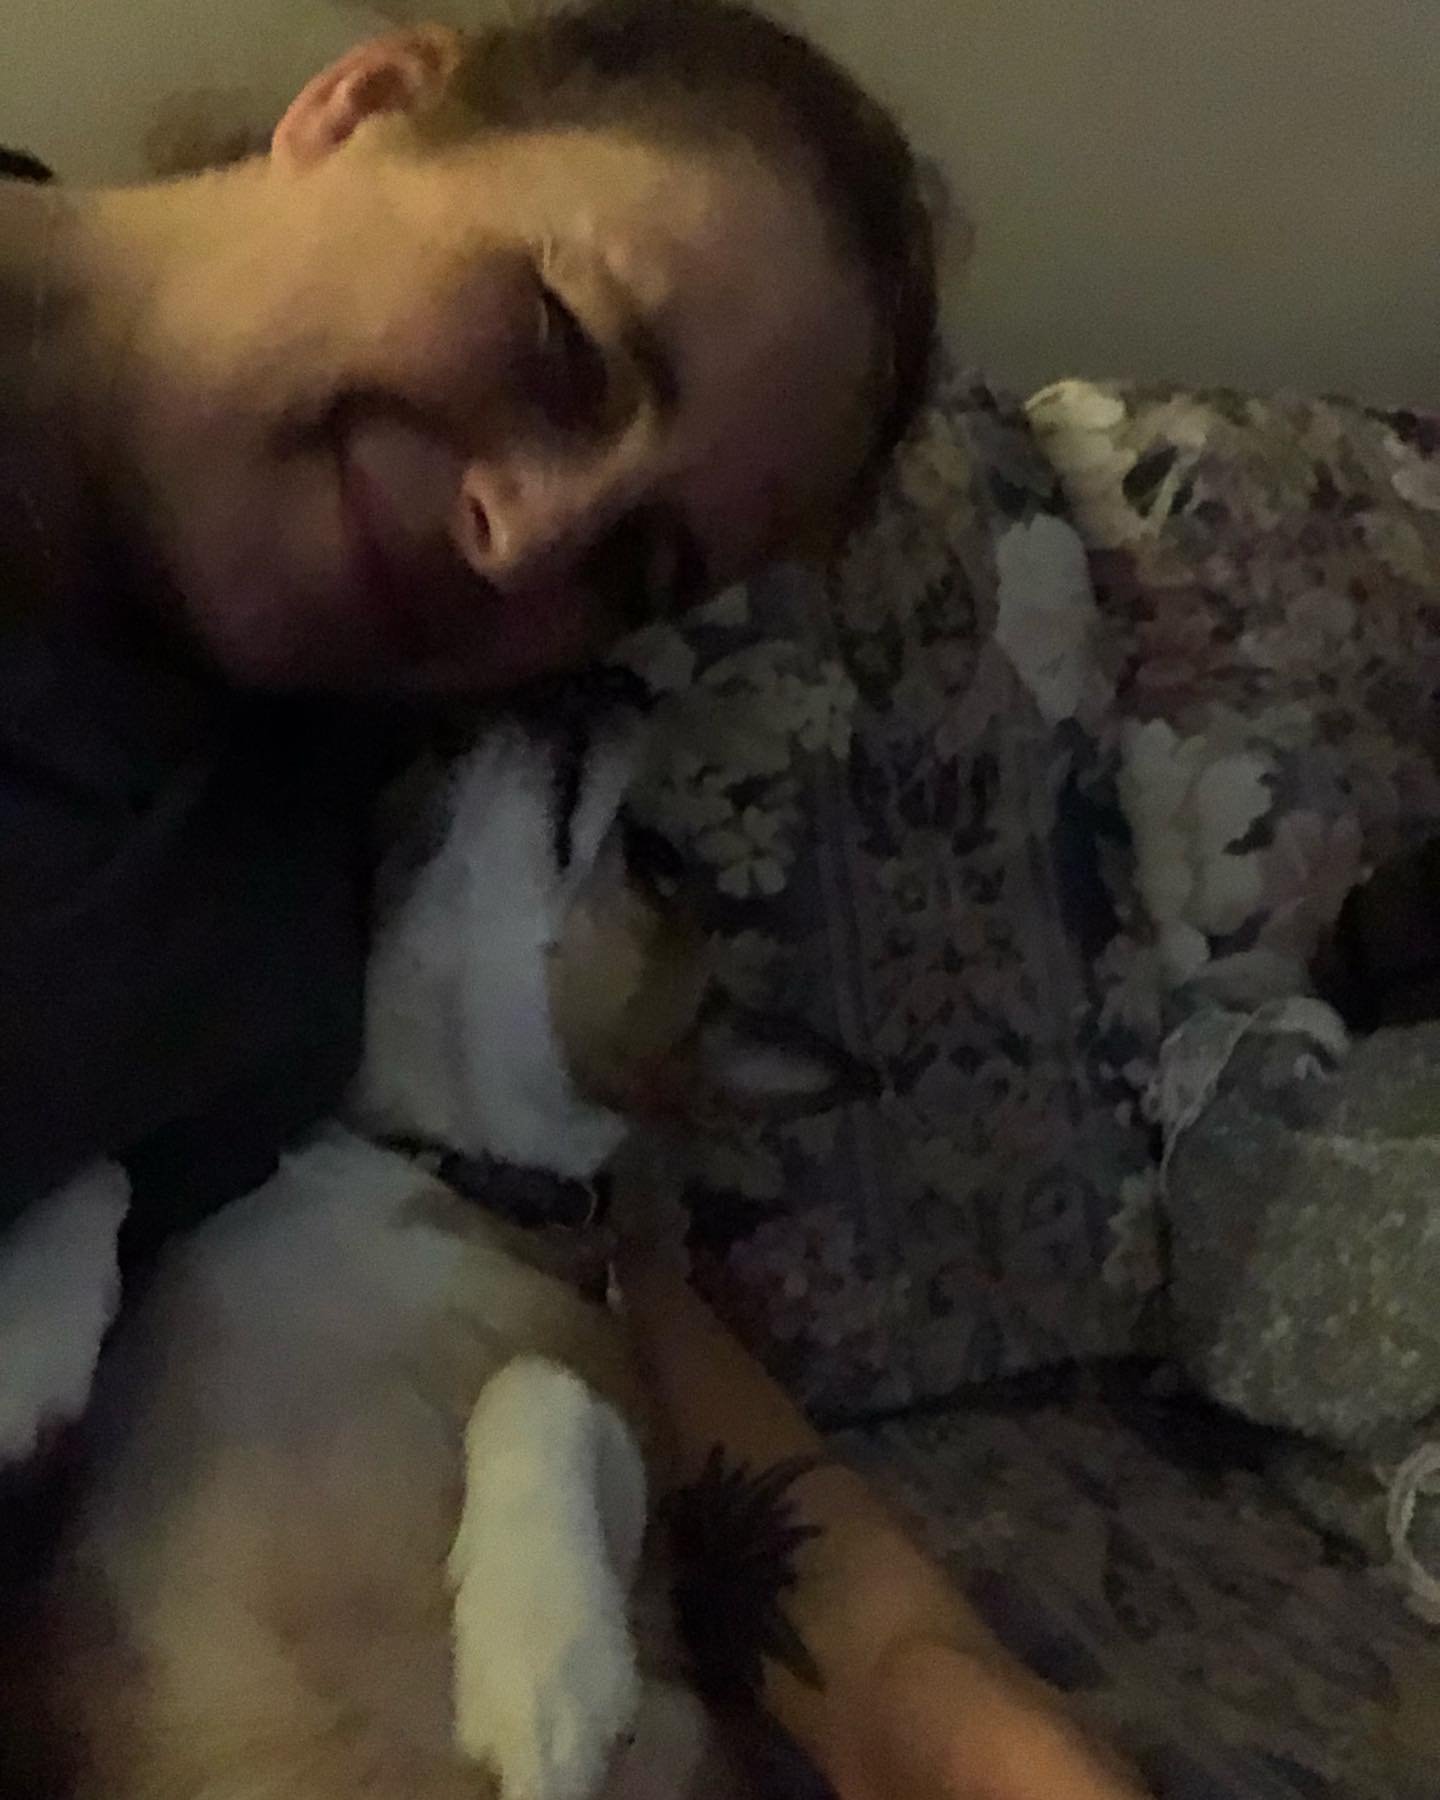 Welp, just spent a good 40 mins recording the latest podcast episode only to realize, on the playback, that the mic must have died one minute in. I got 39 minutes of contemplative silence, lol. 🤣 Rayli and I have decided to laugh and snuggle about i